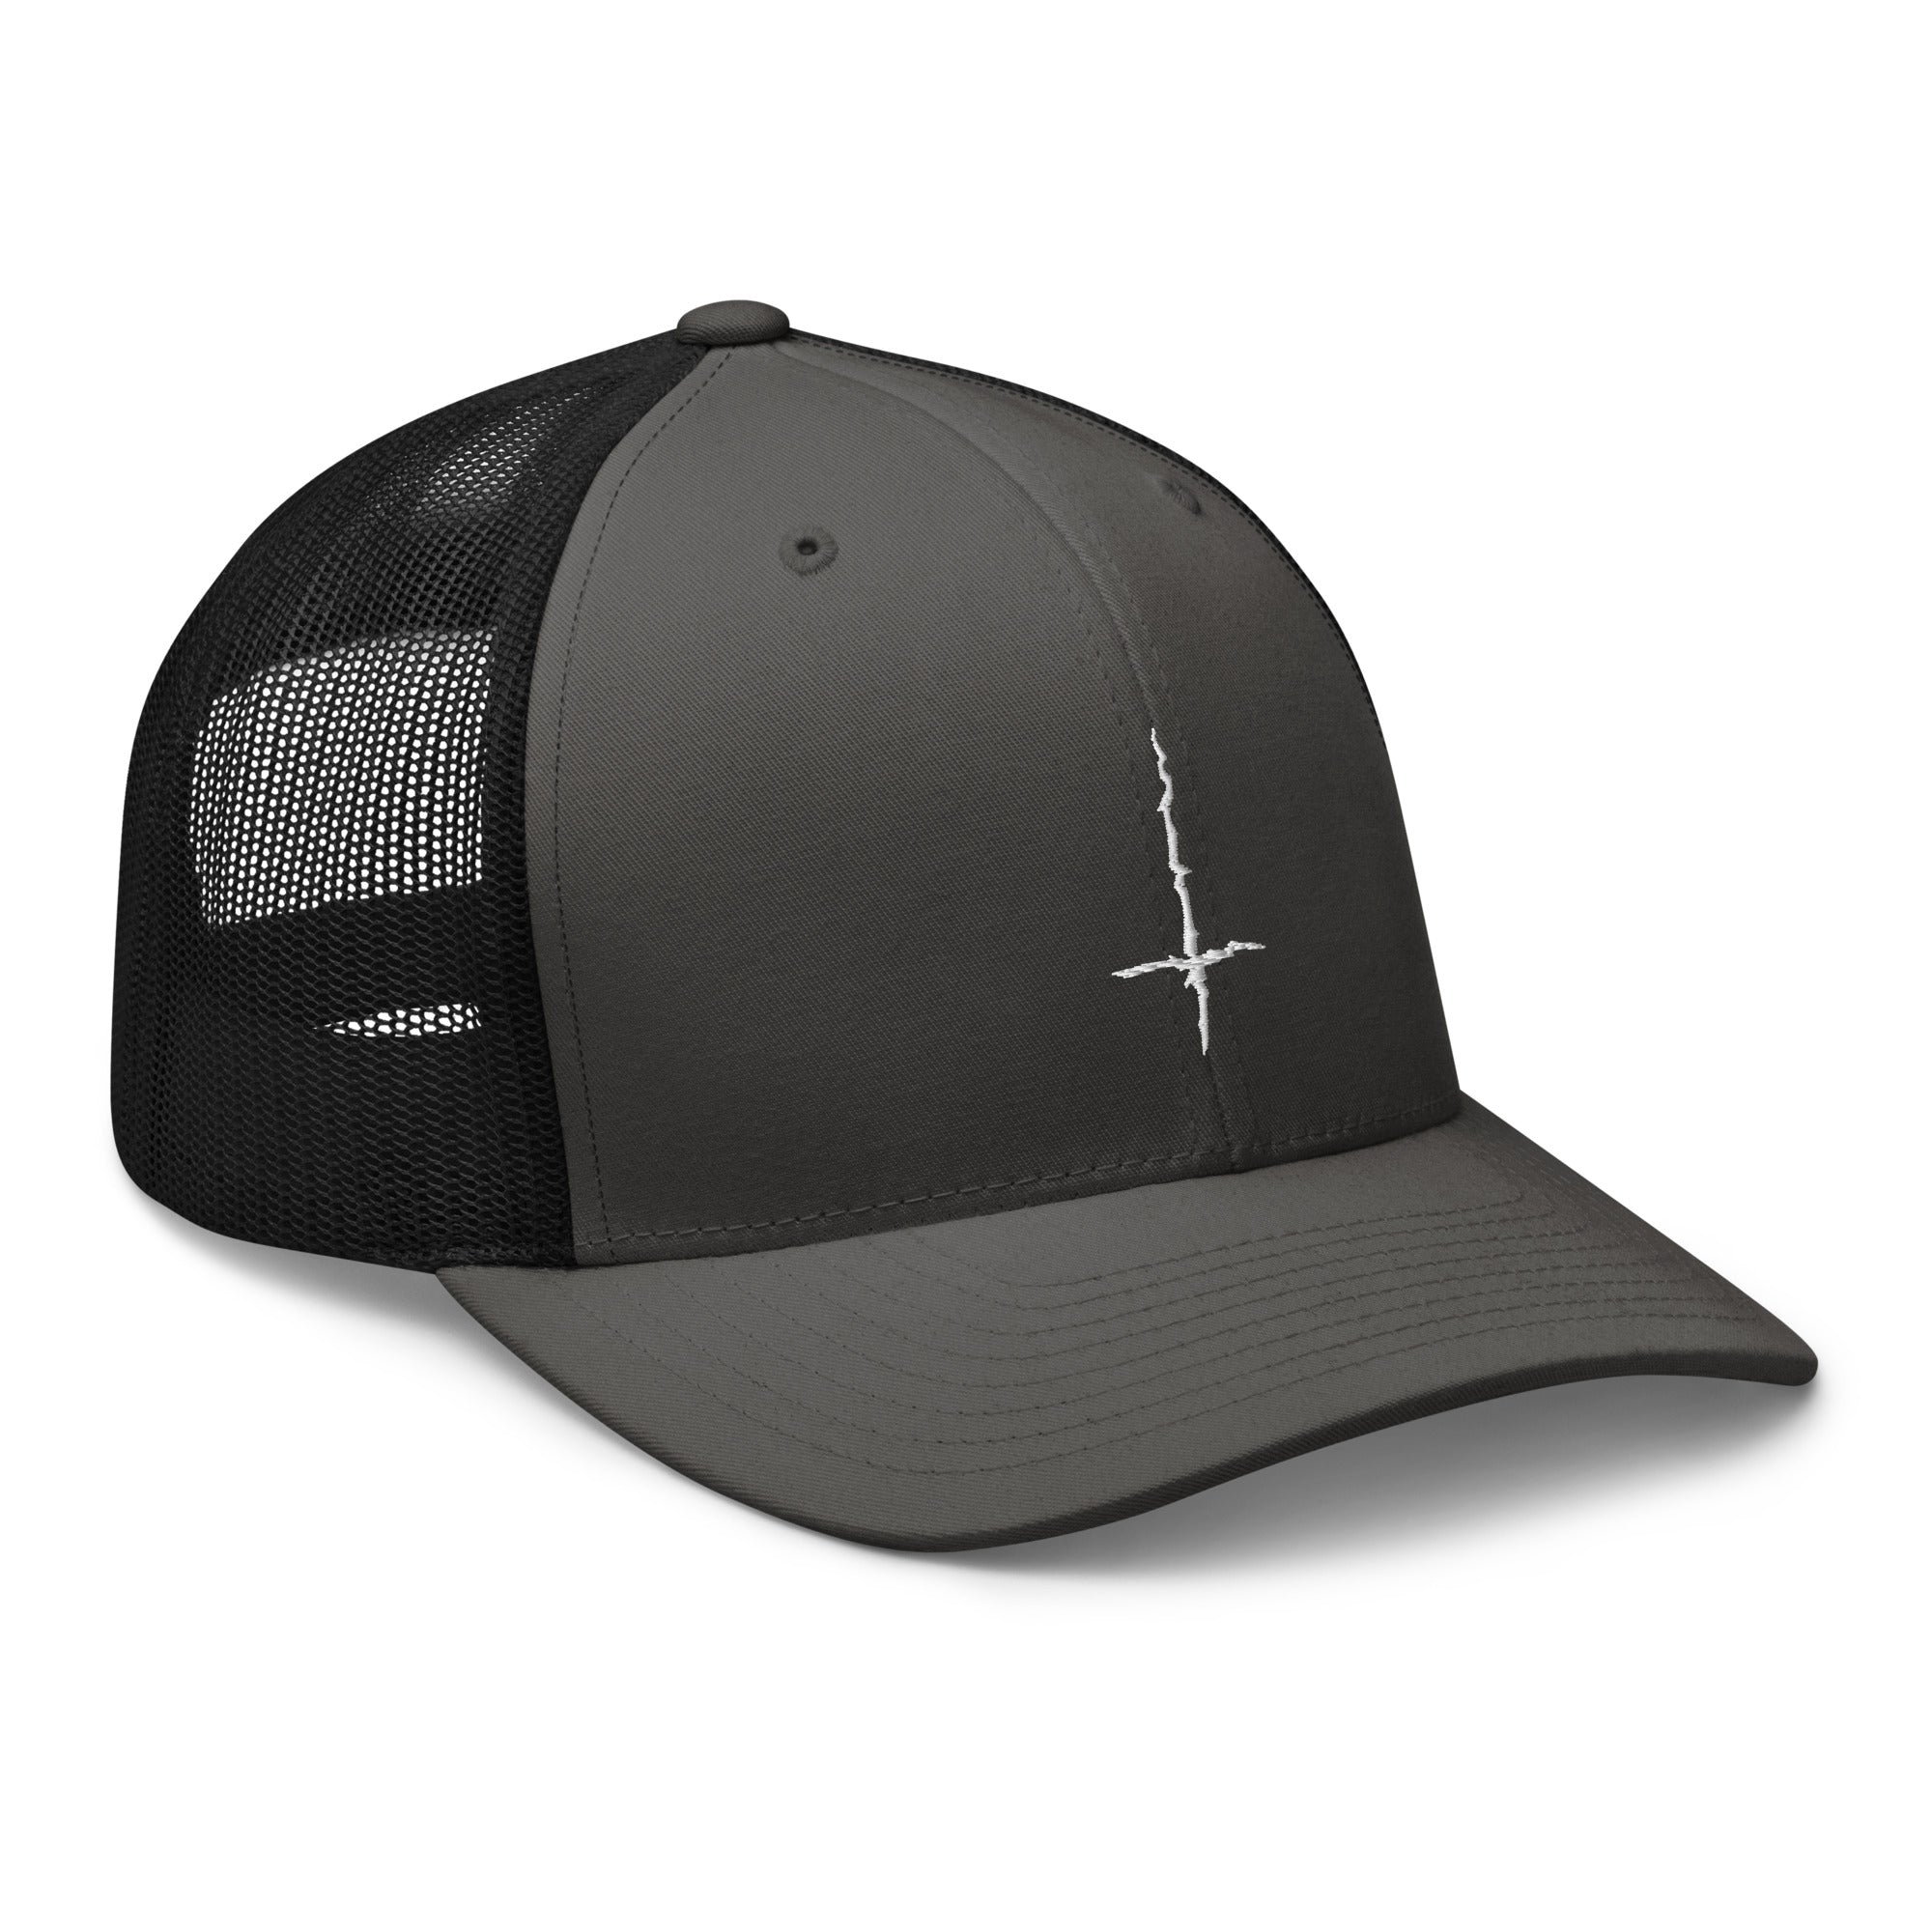 White Inverted Cross Black Metal Style Embroidered Trucker Cap Snapback Hat